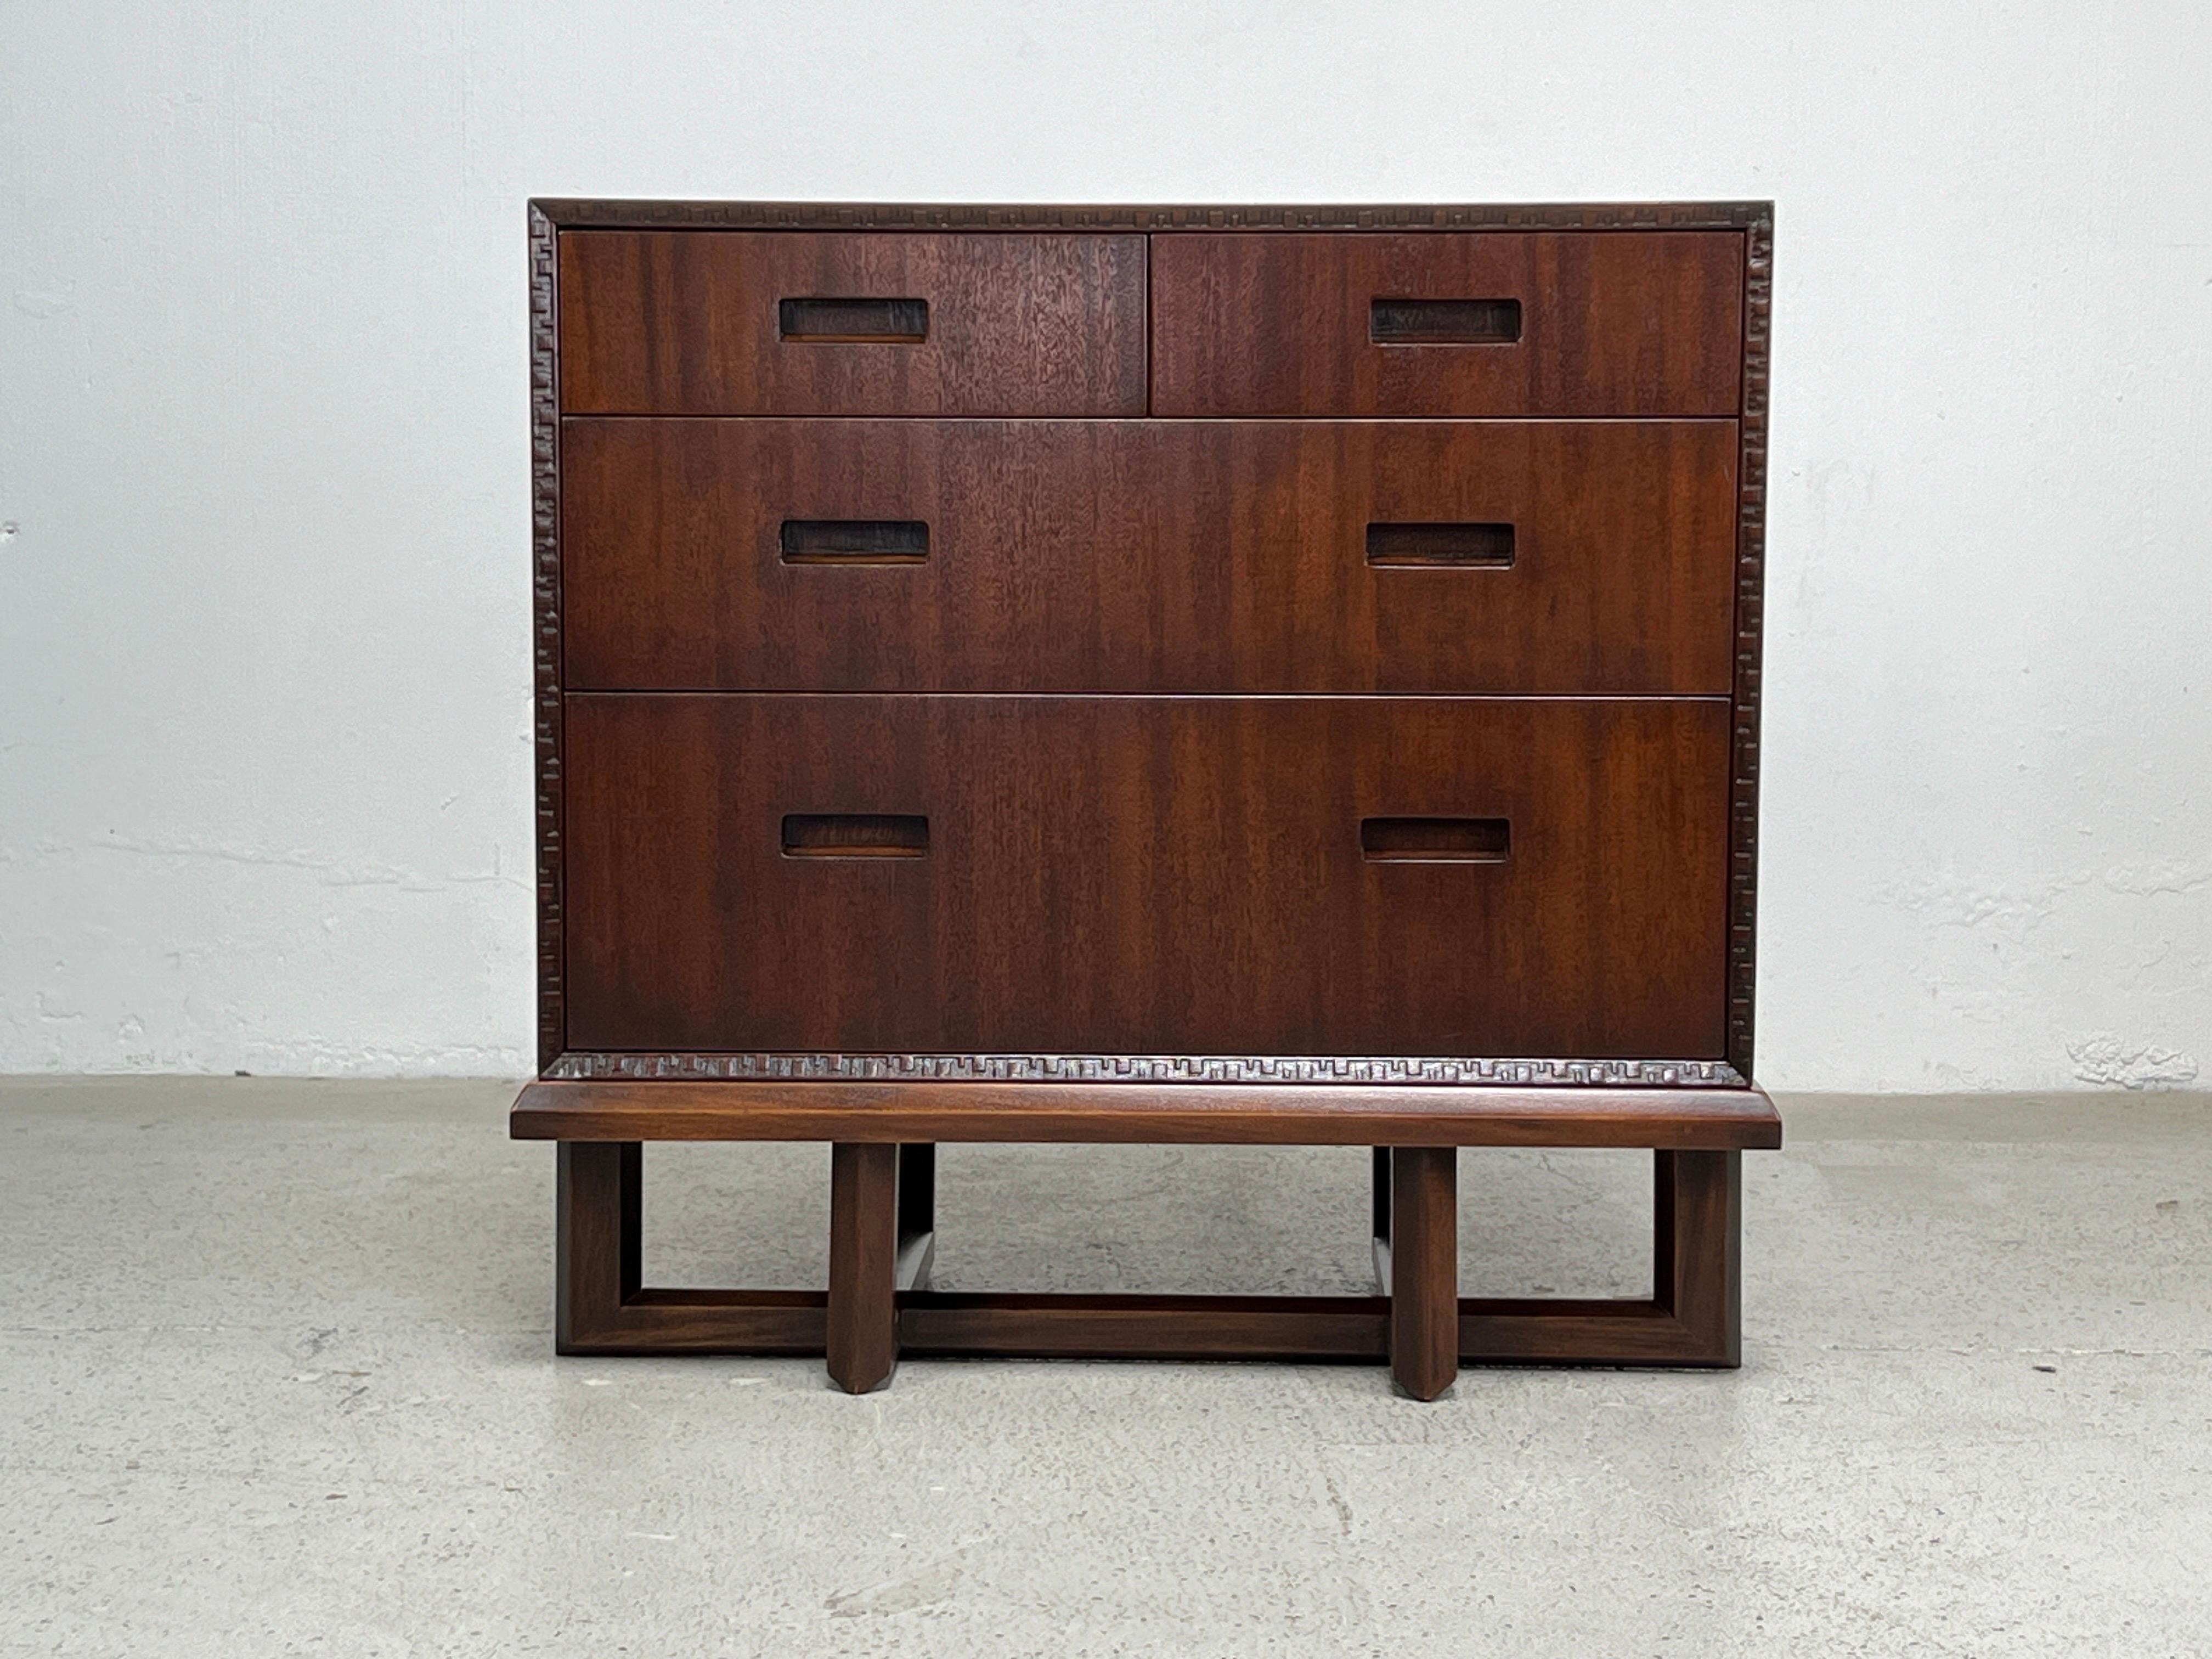 A rare mahogany chest of drawers on stand designed by Frank Lloyd Wright for Henredon.